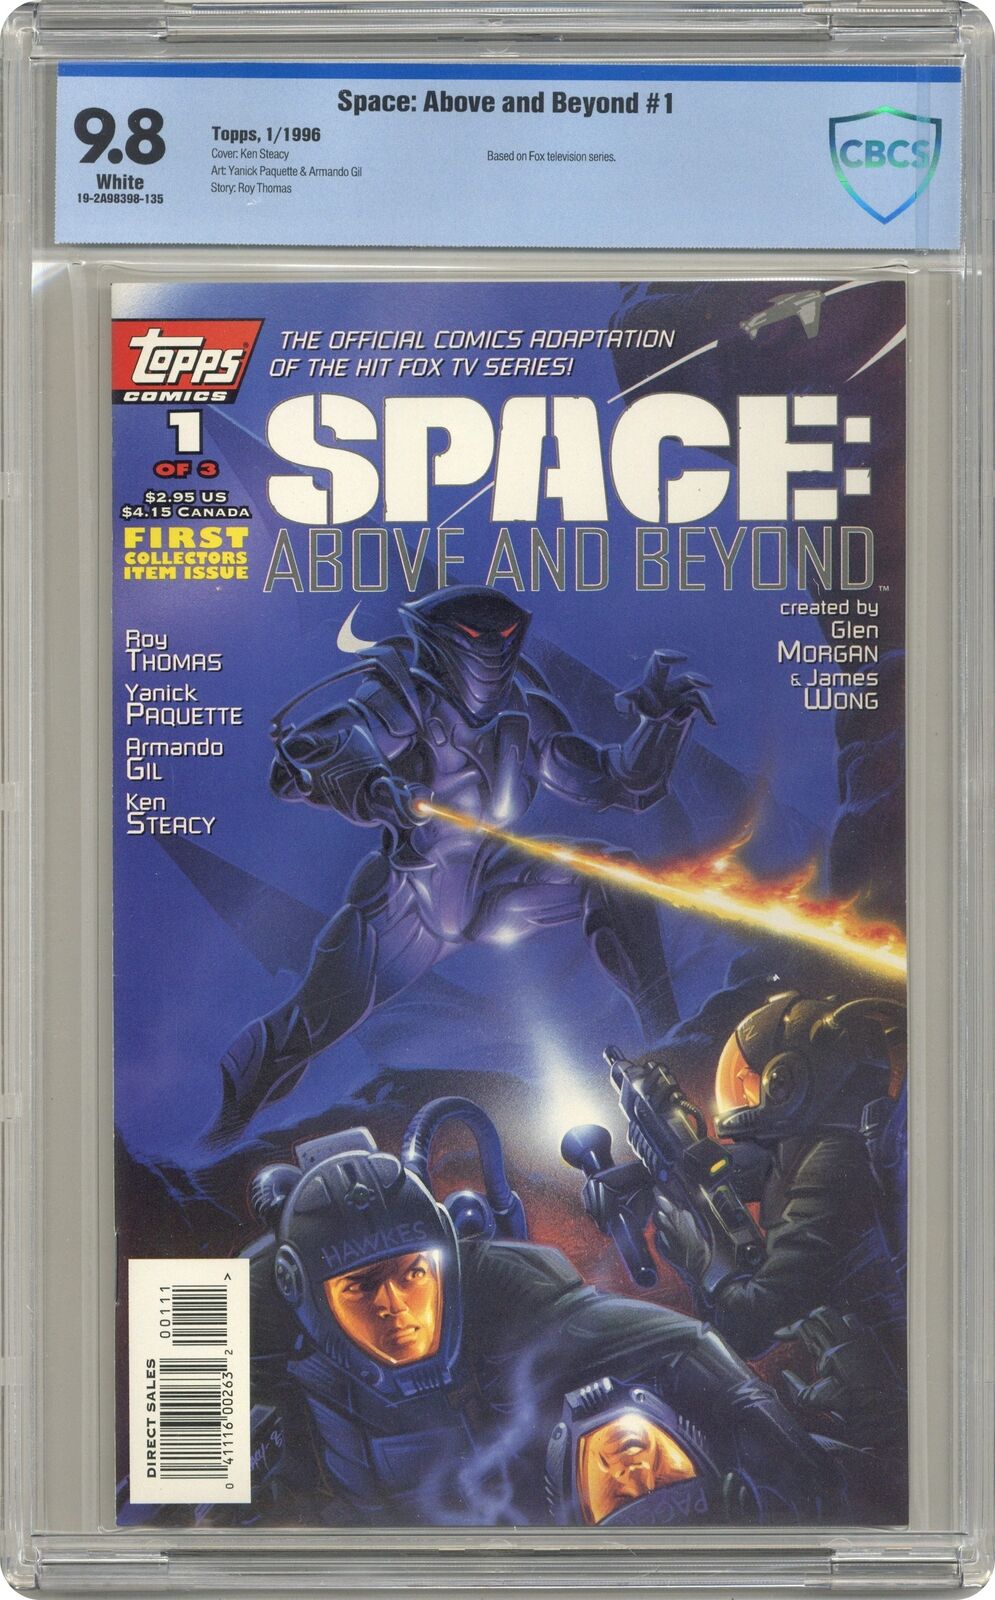 Space Above and Beyond #1 CBCS 9.8 1996 19-2A98398-135